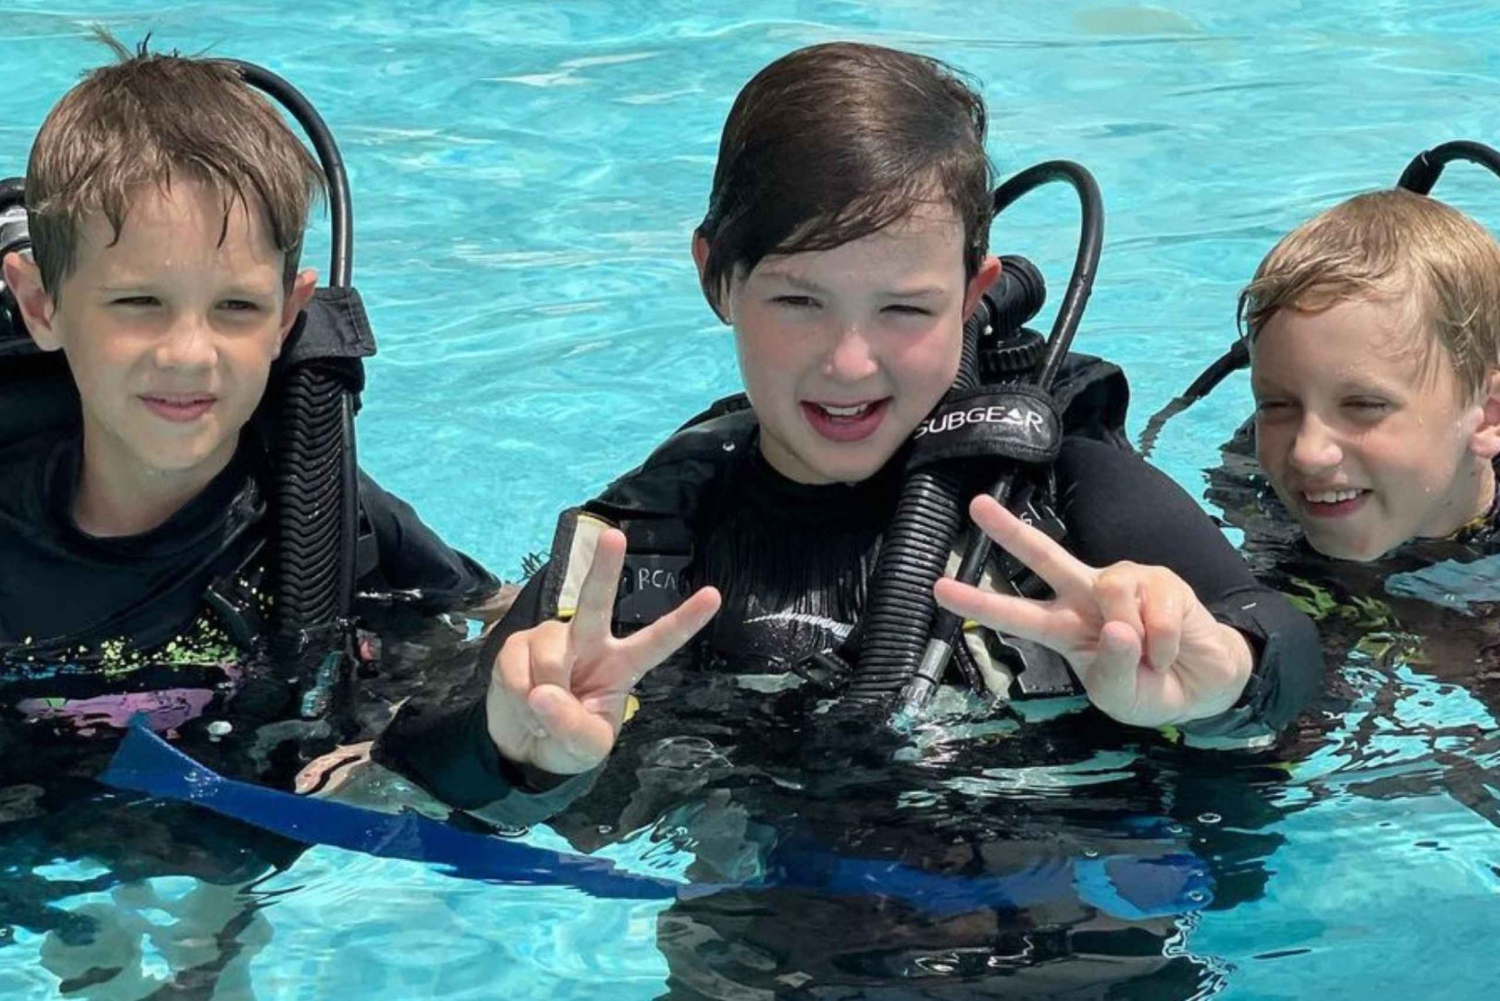 Dubai: Introductory Diving Course for Kids 8-10 Years Old